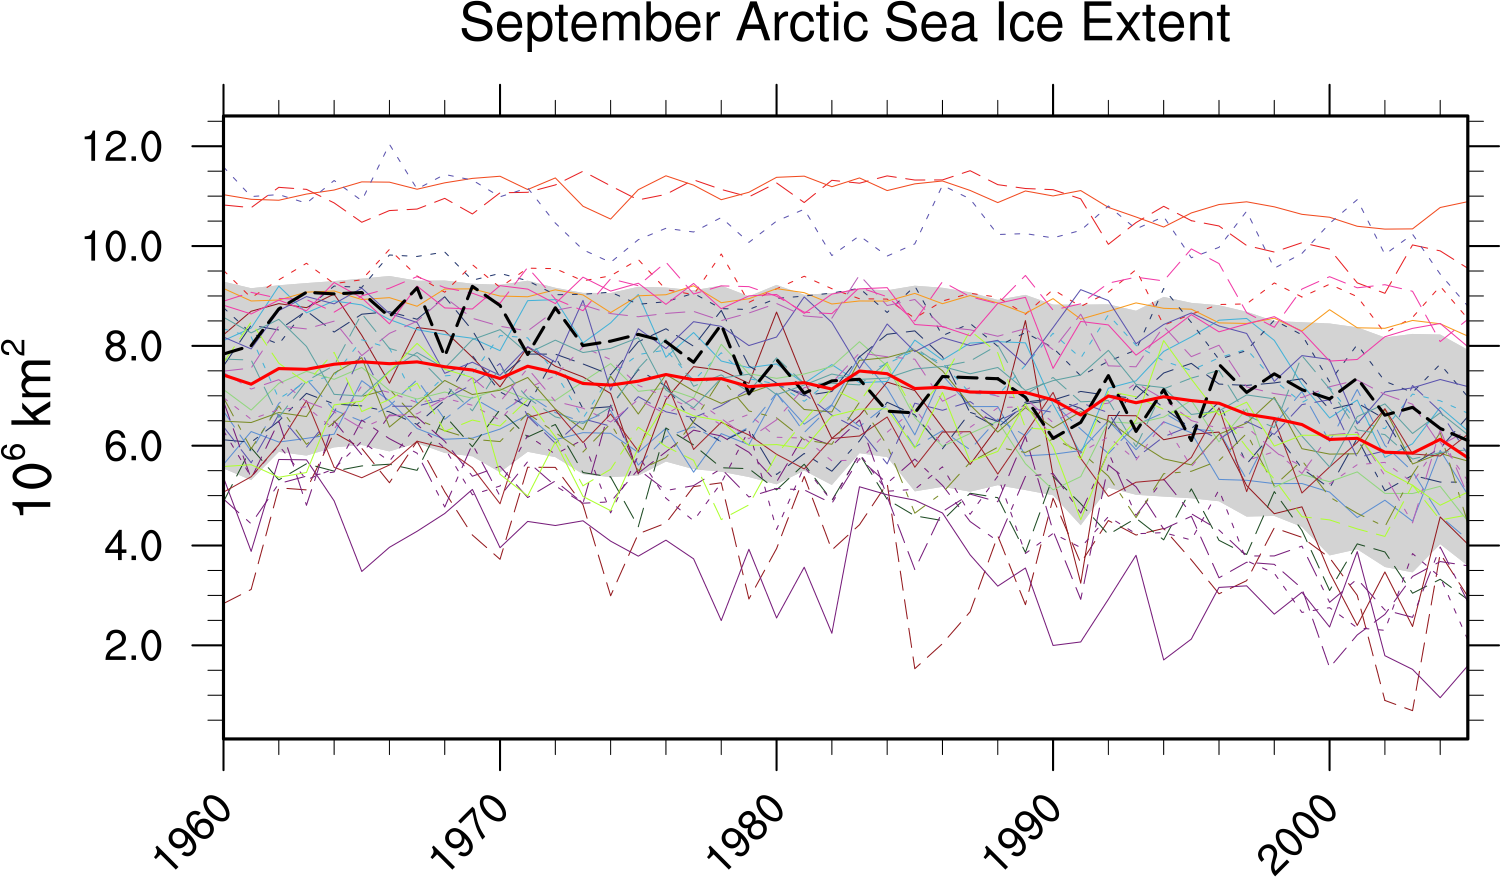 ../_images/extent_sic_Arctic_September_1960-2005.png